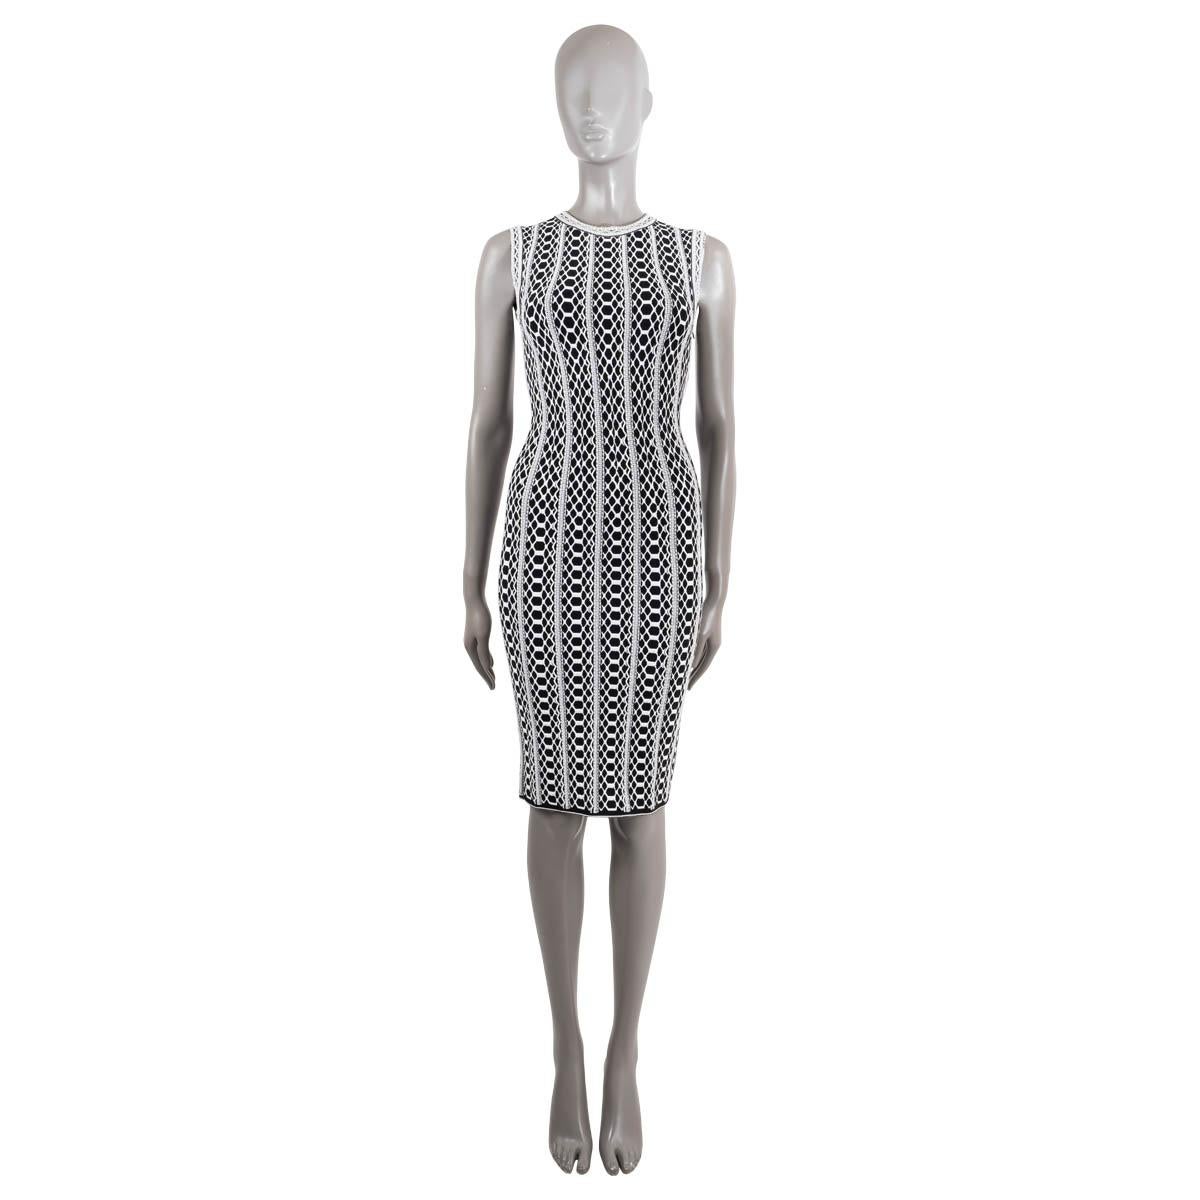 100% authentic Alaïa python-jacquard knit dress in black and white viscose (70%), polyamide (15%) and polyester (6%). Opens with a concealed zipper on the side. Unlined. Brand new comes with tags.

Measurements
Model	2E9MR006R014
Tag